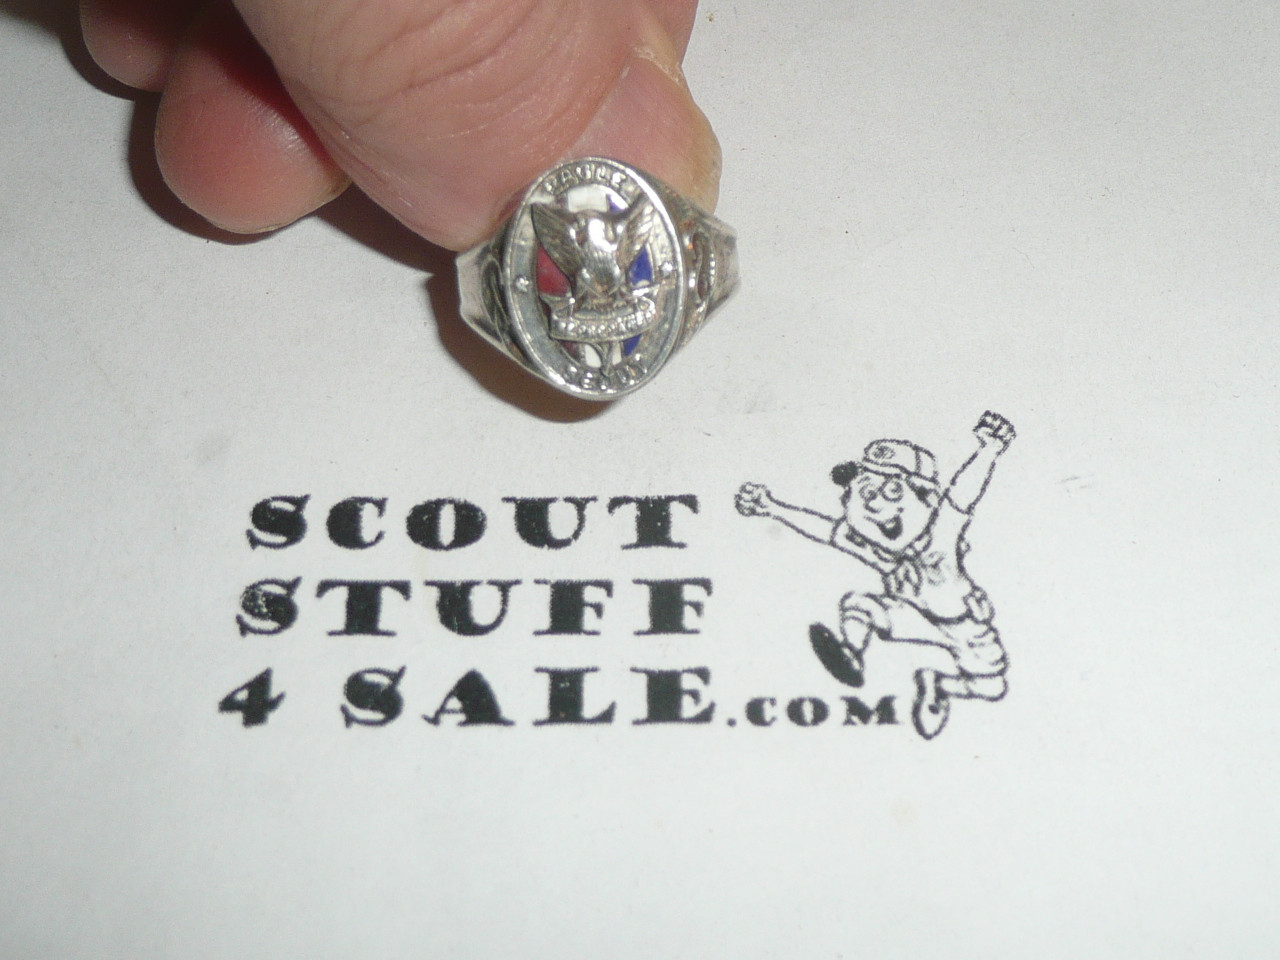 Eagle Scout Ring, 1930's, STERLING Silver, Horizontal knot, MINT Condition, Size 7, Can be sized to fit